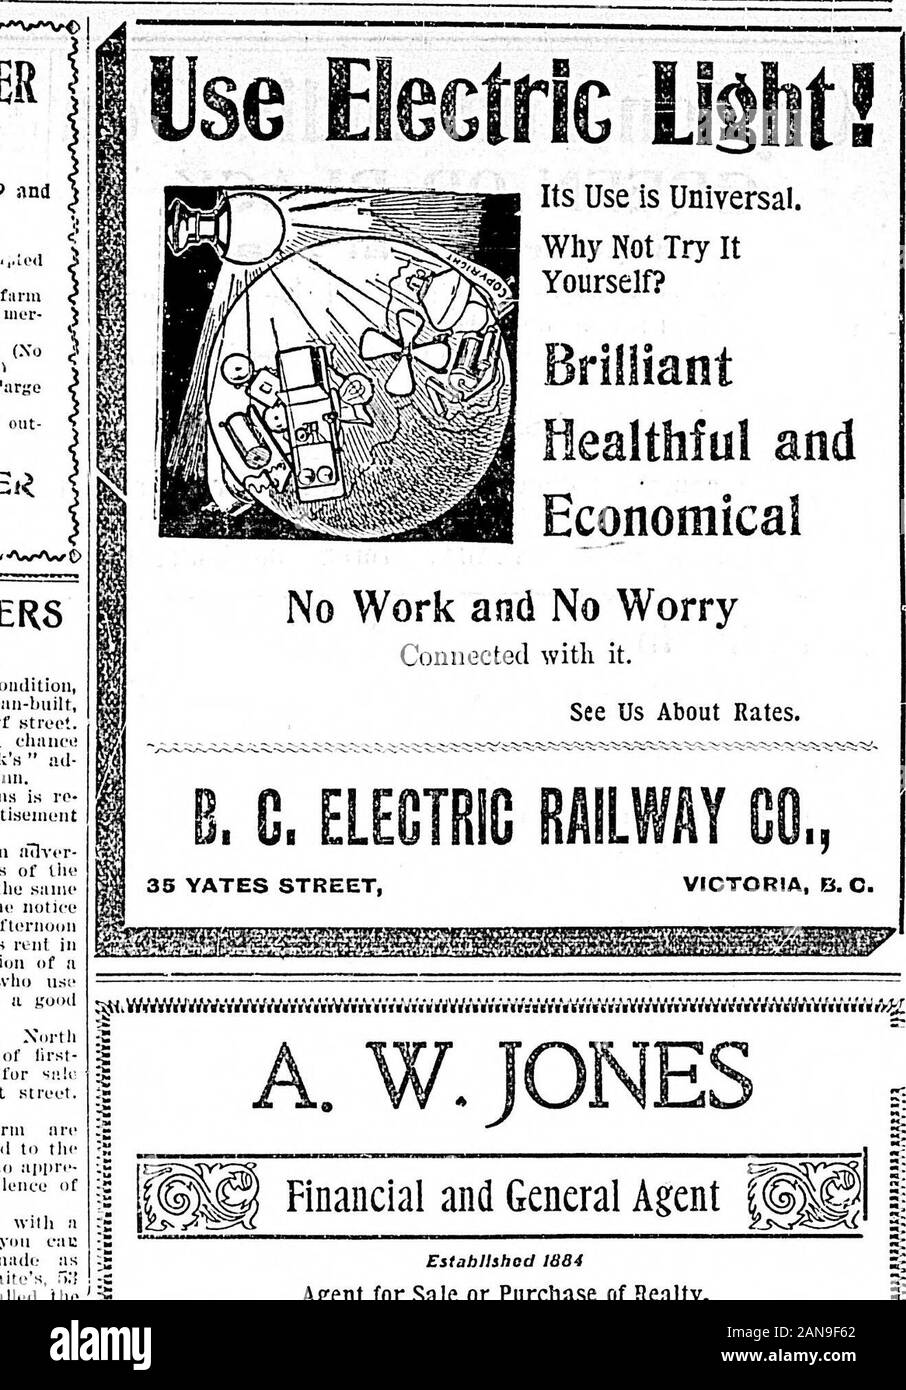 Daily Colonist (1901-03-31) . t and excellence ofworkmanship. Why wear out yonr patience with aworn-out lawn mower, when you cathave it groiind, re|iaired and madi; asgood as new by calling at ,1. Waites, &gt;:,lort street, who iia:i Jist installed theonly iiiachinu in town for grindinglawn movers. See his ud. in anothercolumn. Jhe proprietors of the Iai. nc Sauceit iiiigar Works desire to call the at-tention of their numerous patrons lothe caution label now in use on theirfaiiiiius geiiiiiiie Itar flarbor TomatoKeteliiip. This i.s done for Ihe purposeof iiroiicliiig the iiublic from worthle Stock Photo